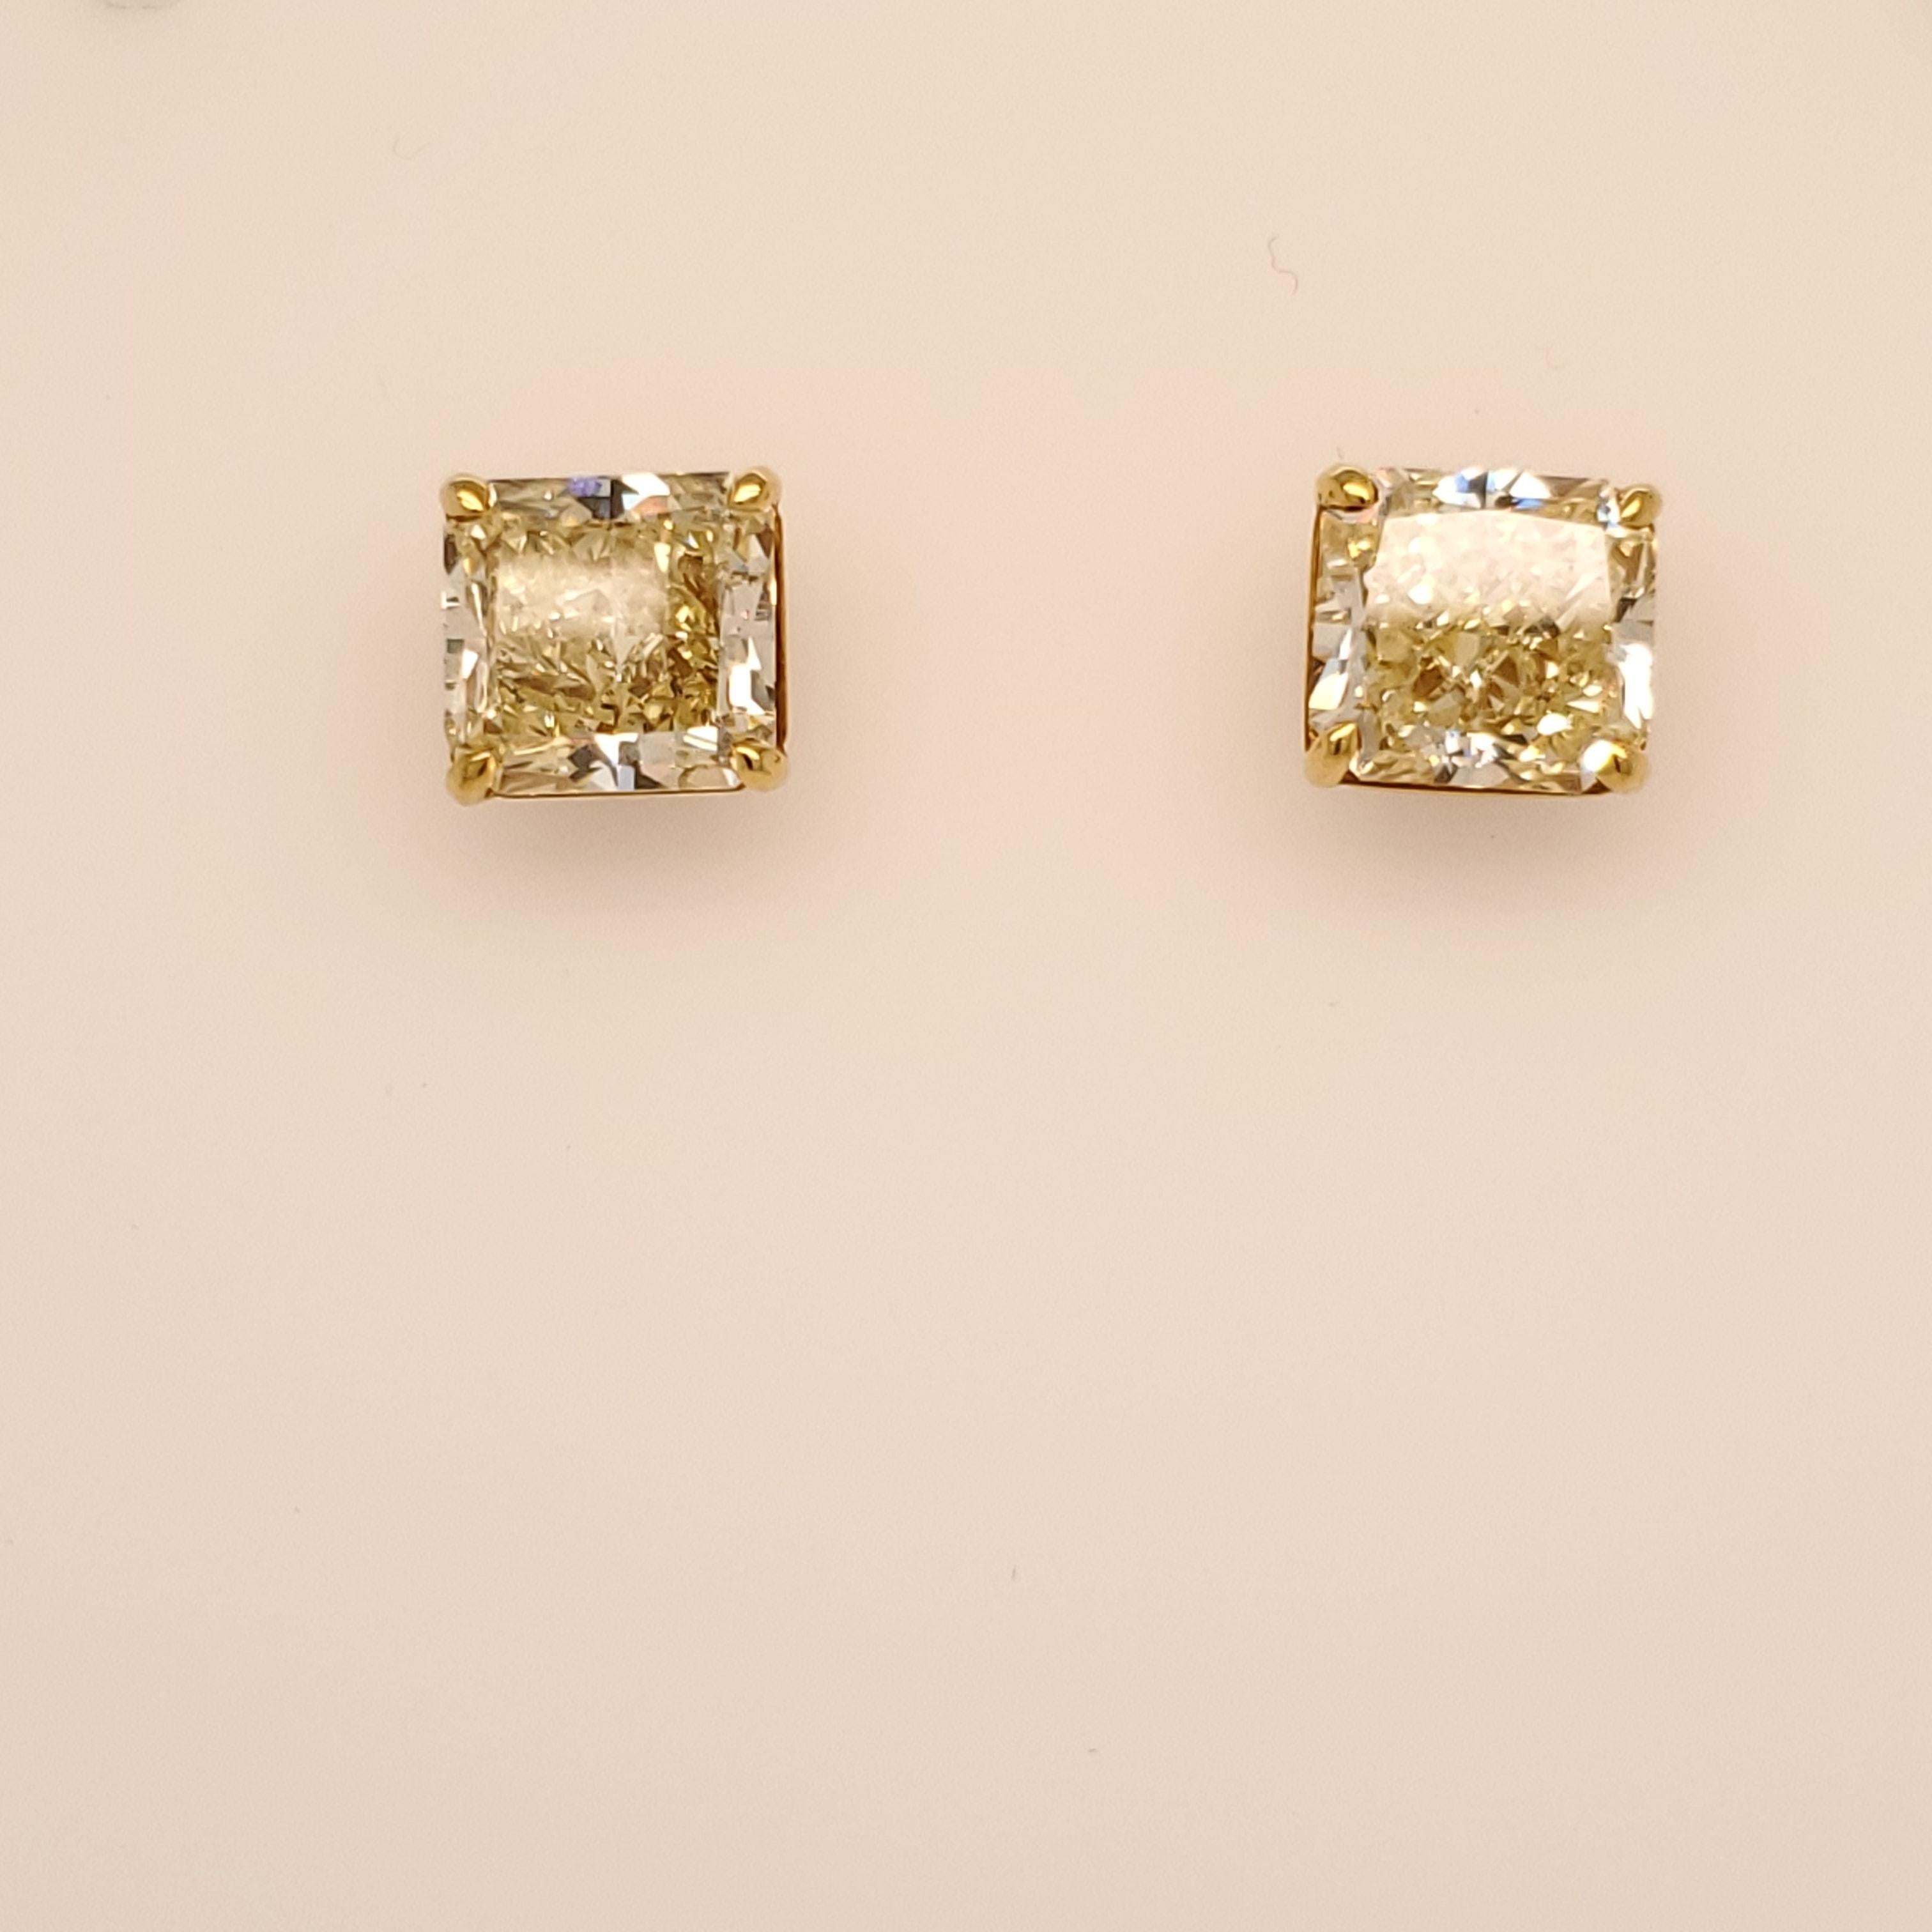 Both Stones are GIA certified Fancy Yellow VS1 quality. Both were cut in our factory to be an exact match of radiant cuts. One weighs 5.15 carats and the second weights 5.16 carats. Set in a 18 karat yellow gold hand made setting. 